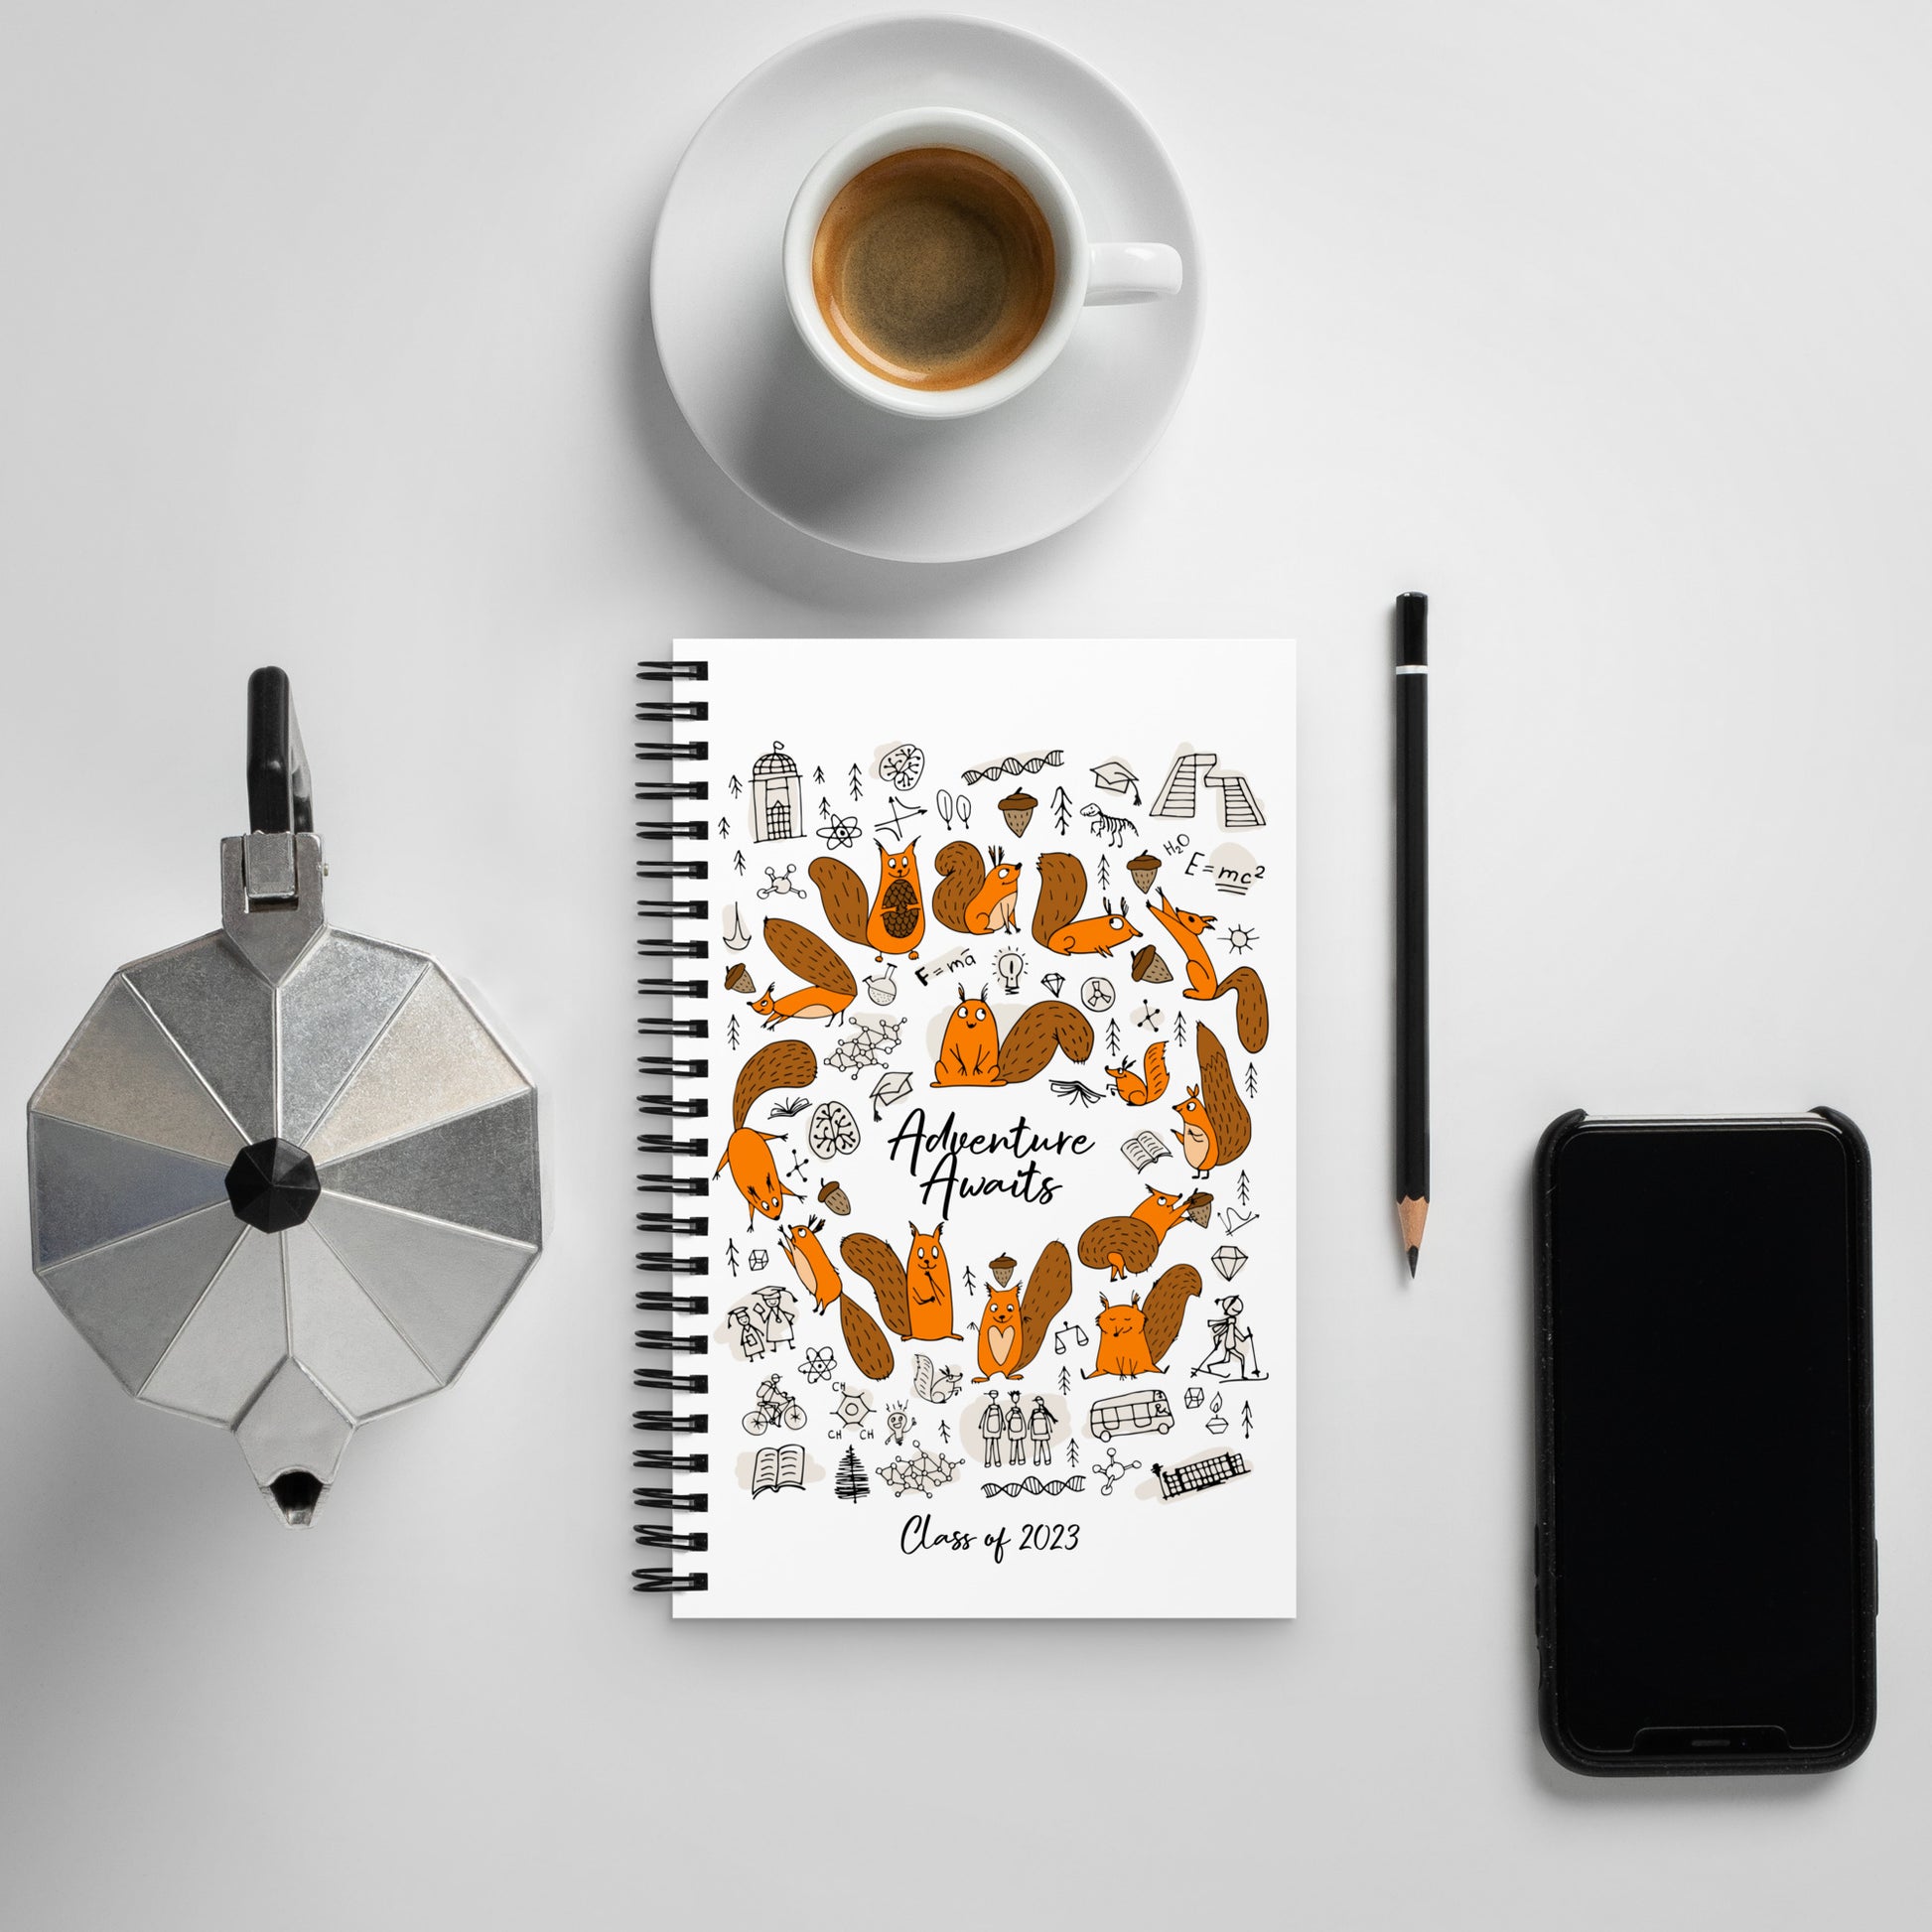 Spiral notebook white with funny science squirrels designer print with coffee and mobile phone on table